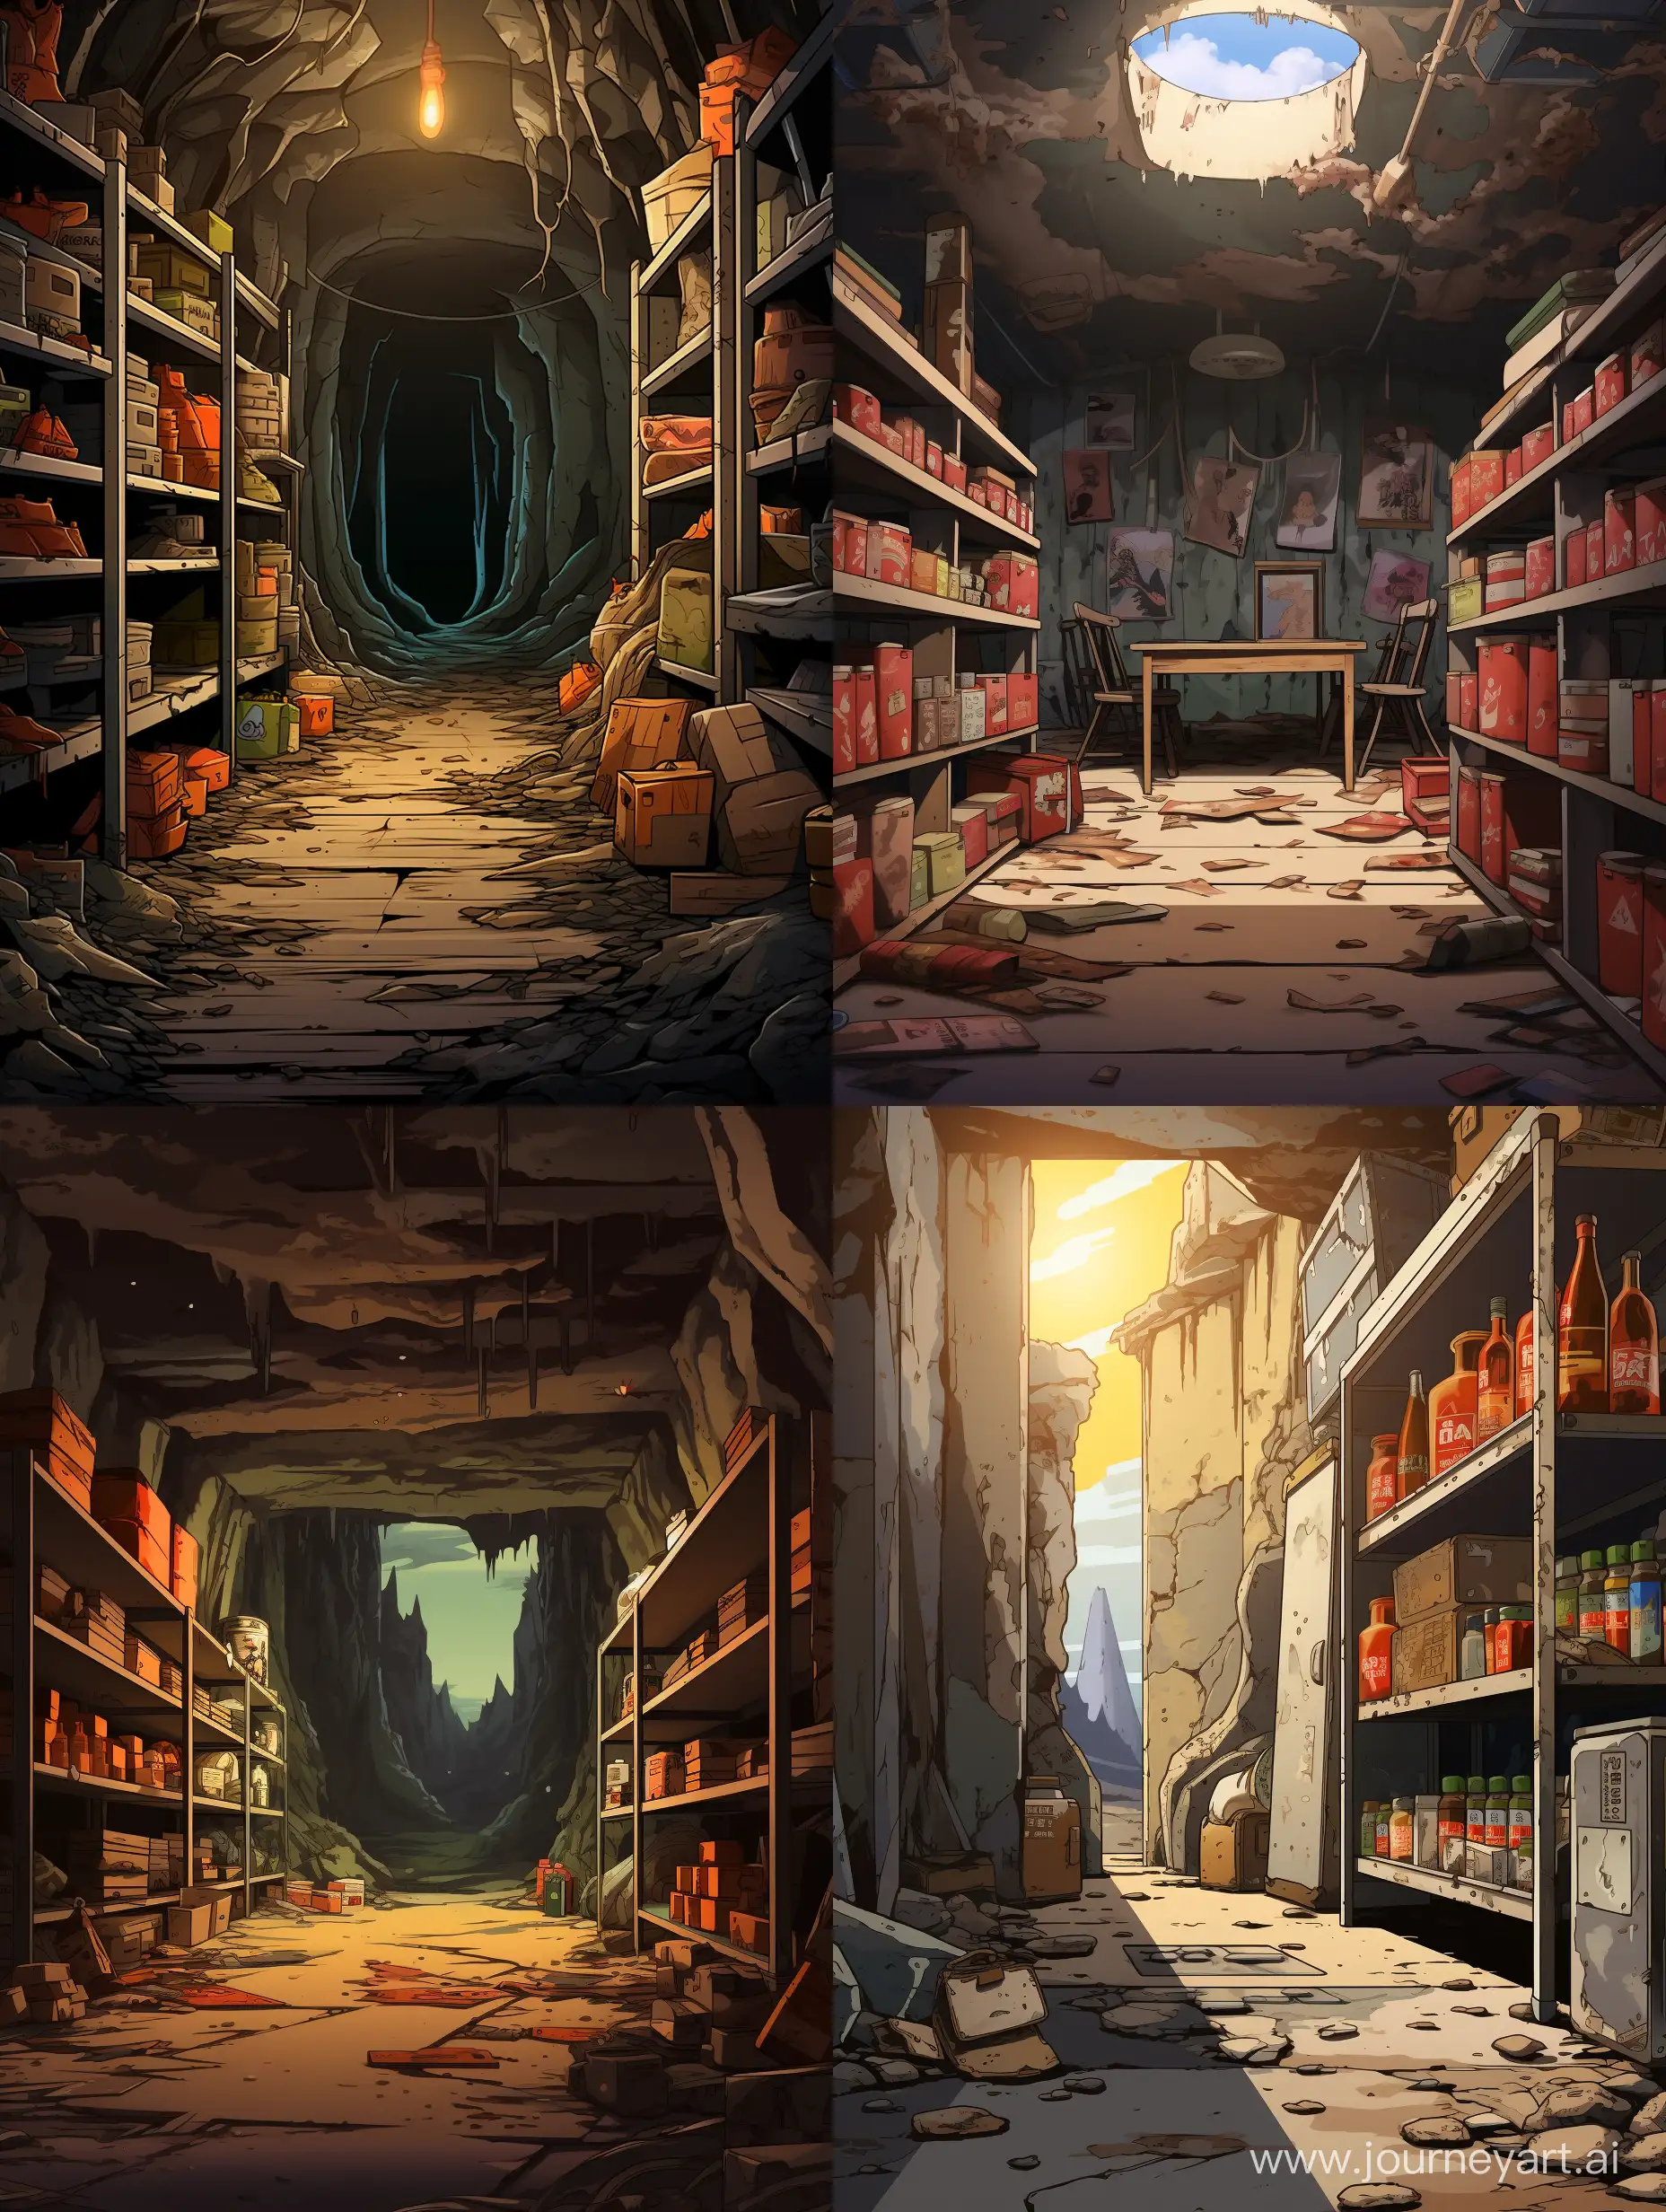 anime style background of a bunker from a nuclear war , shelves with supplies view inside